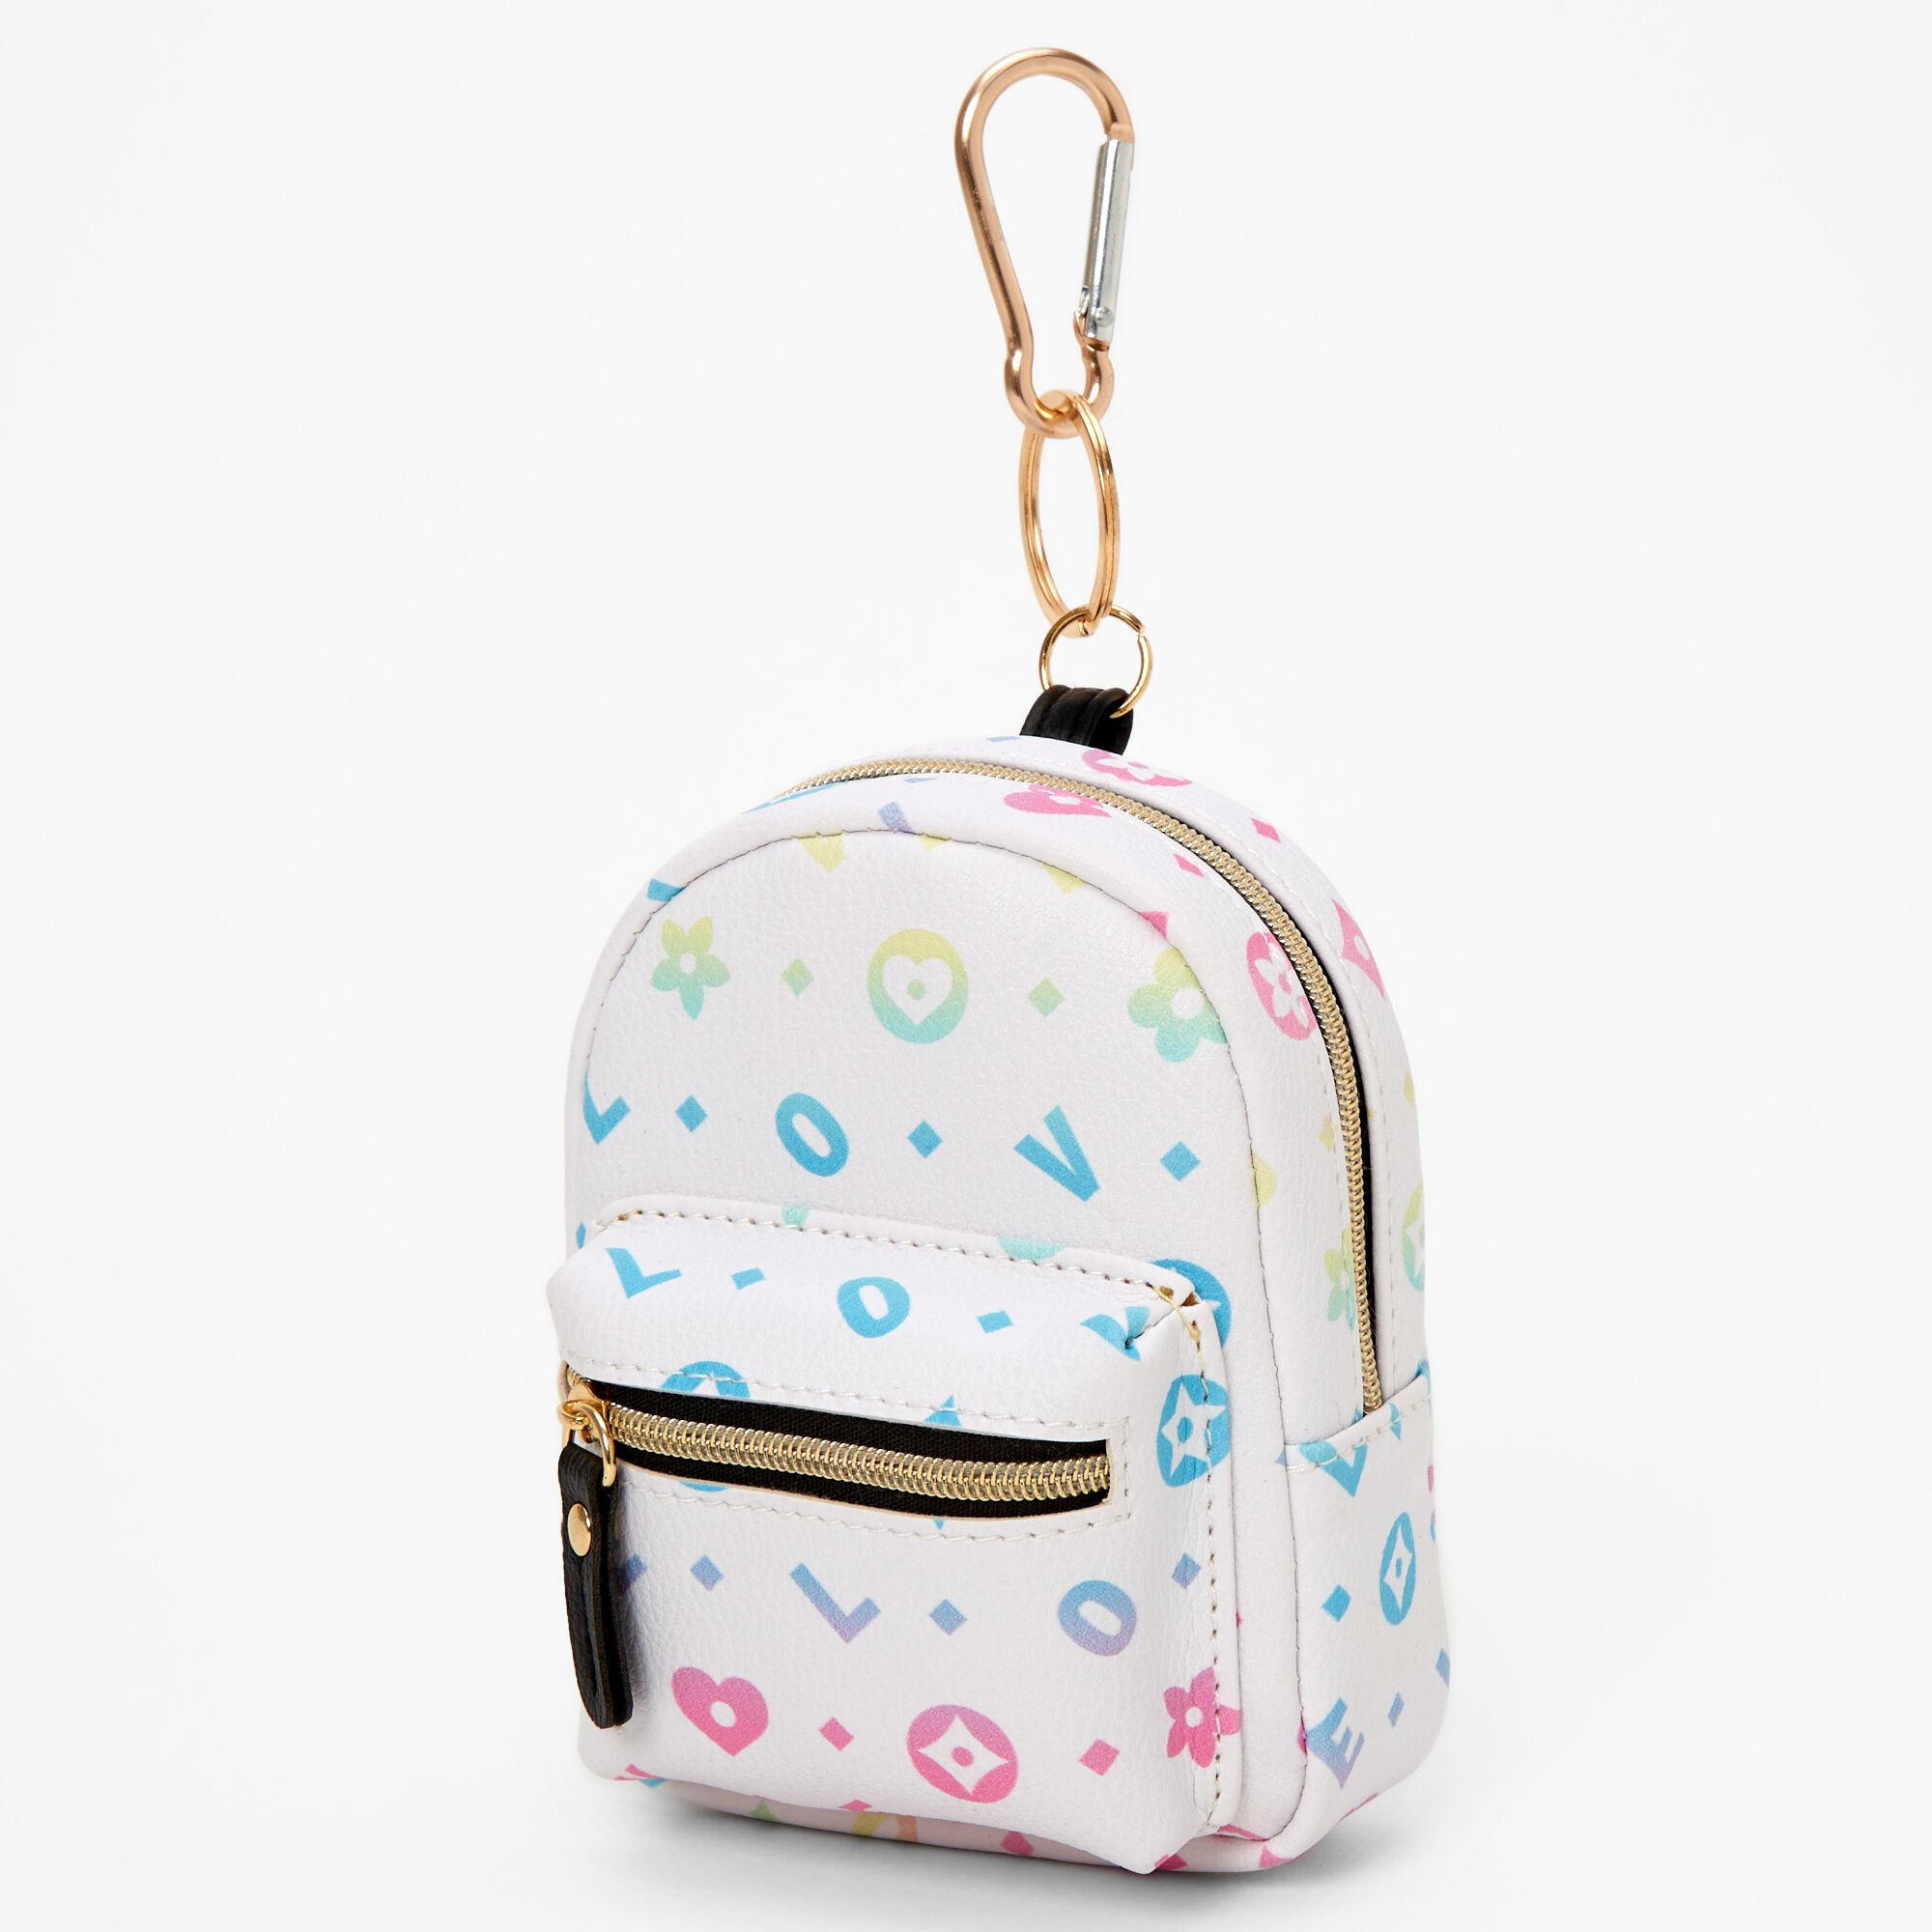 Claires backpack keychain on Stanley cup｜TikTok Search